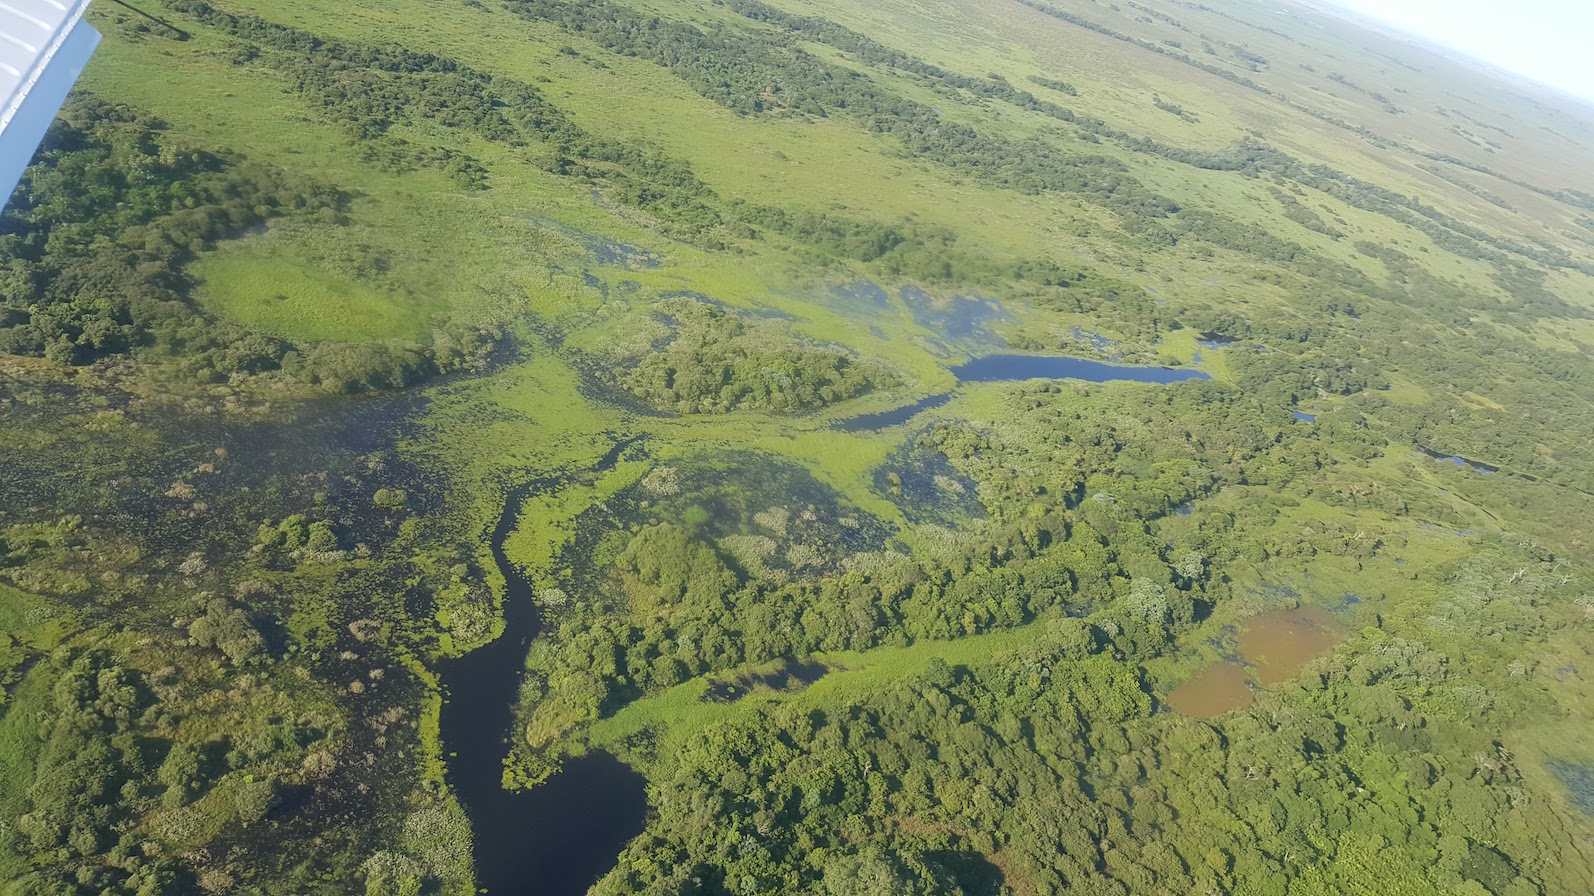 An area of flowing water in the Pantanal